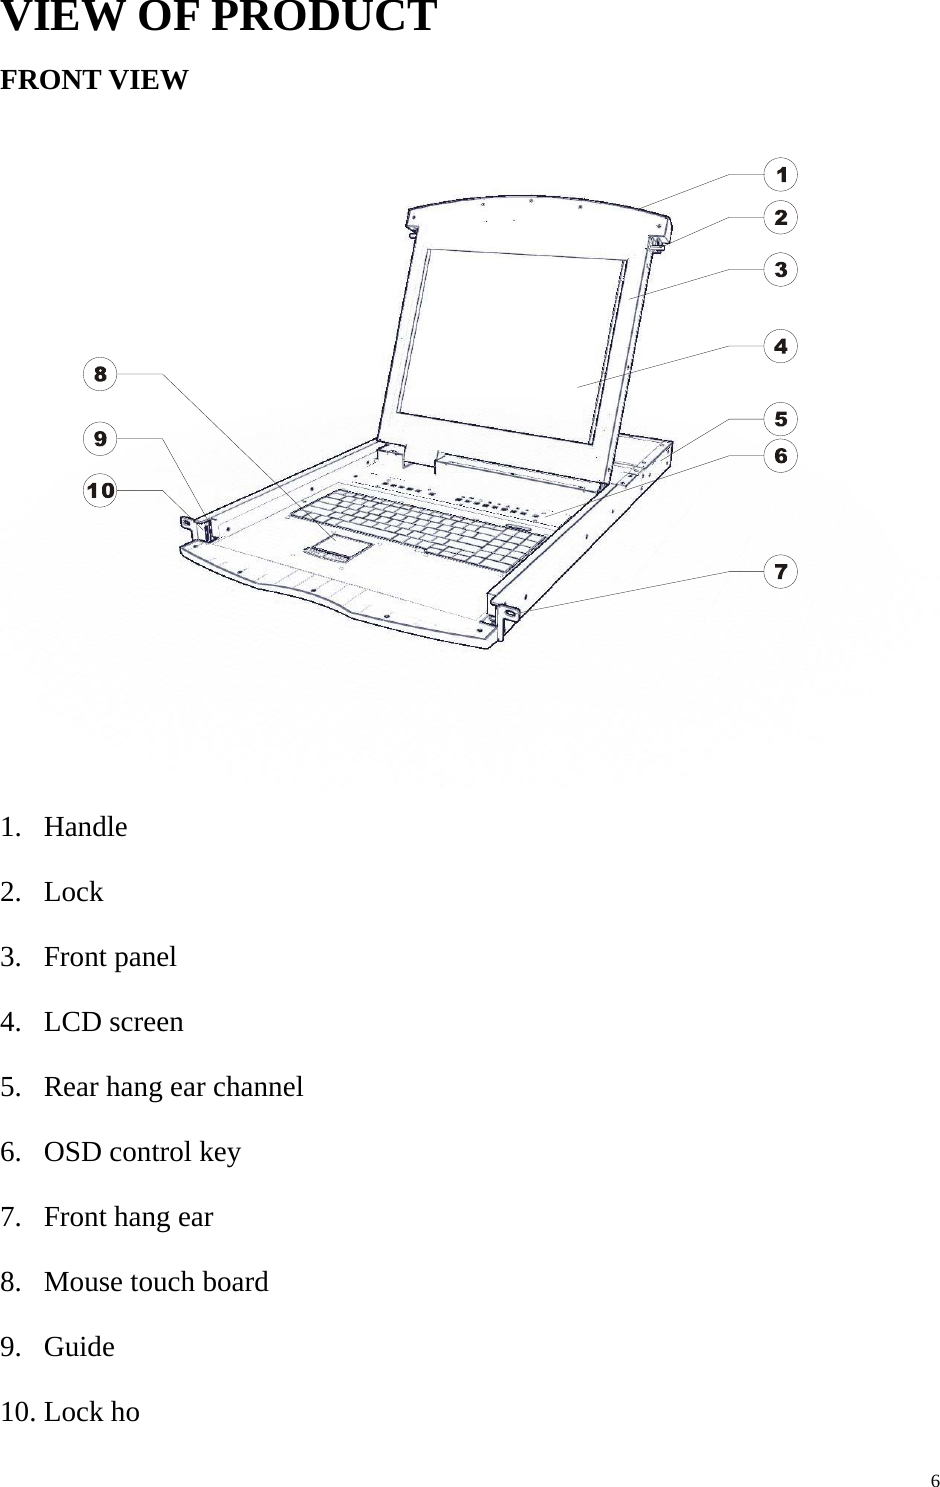      6VIEW OF PRODUCT FRONT VIEW  1. Handle 2. Lock 3. Front panel 4. LCD screen 5. Rear hang ear channel 6. OSD control key 7. Front hang ear 8. Mouse touch board 9. Guide 10. Lock ho 